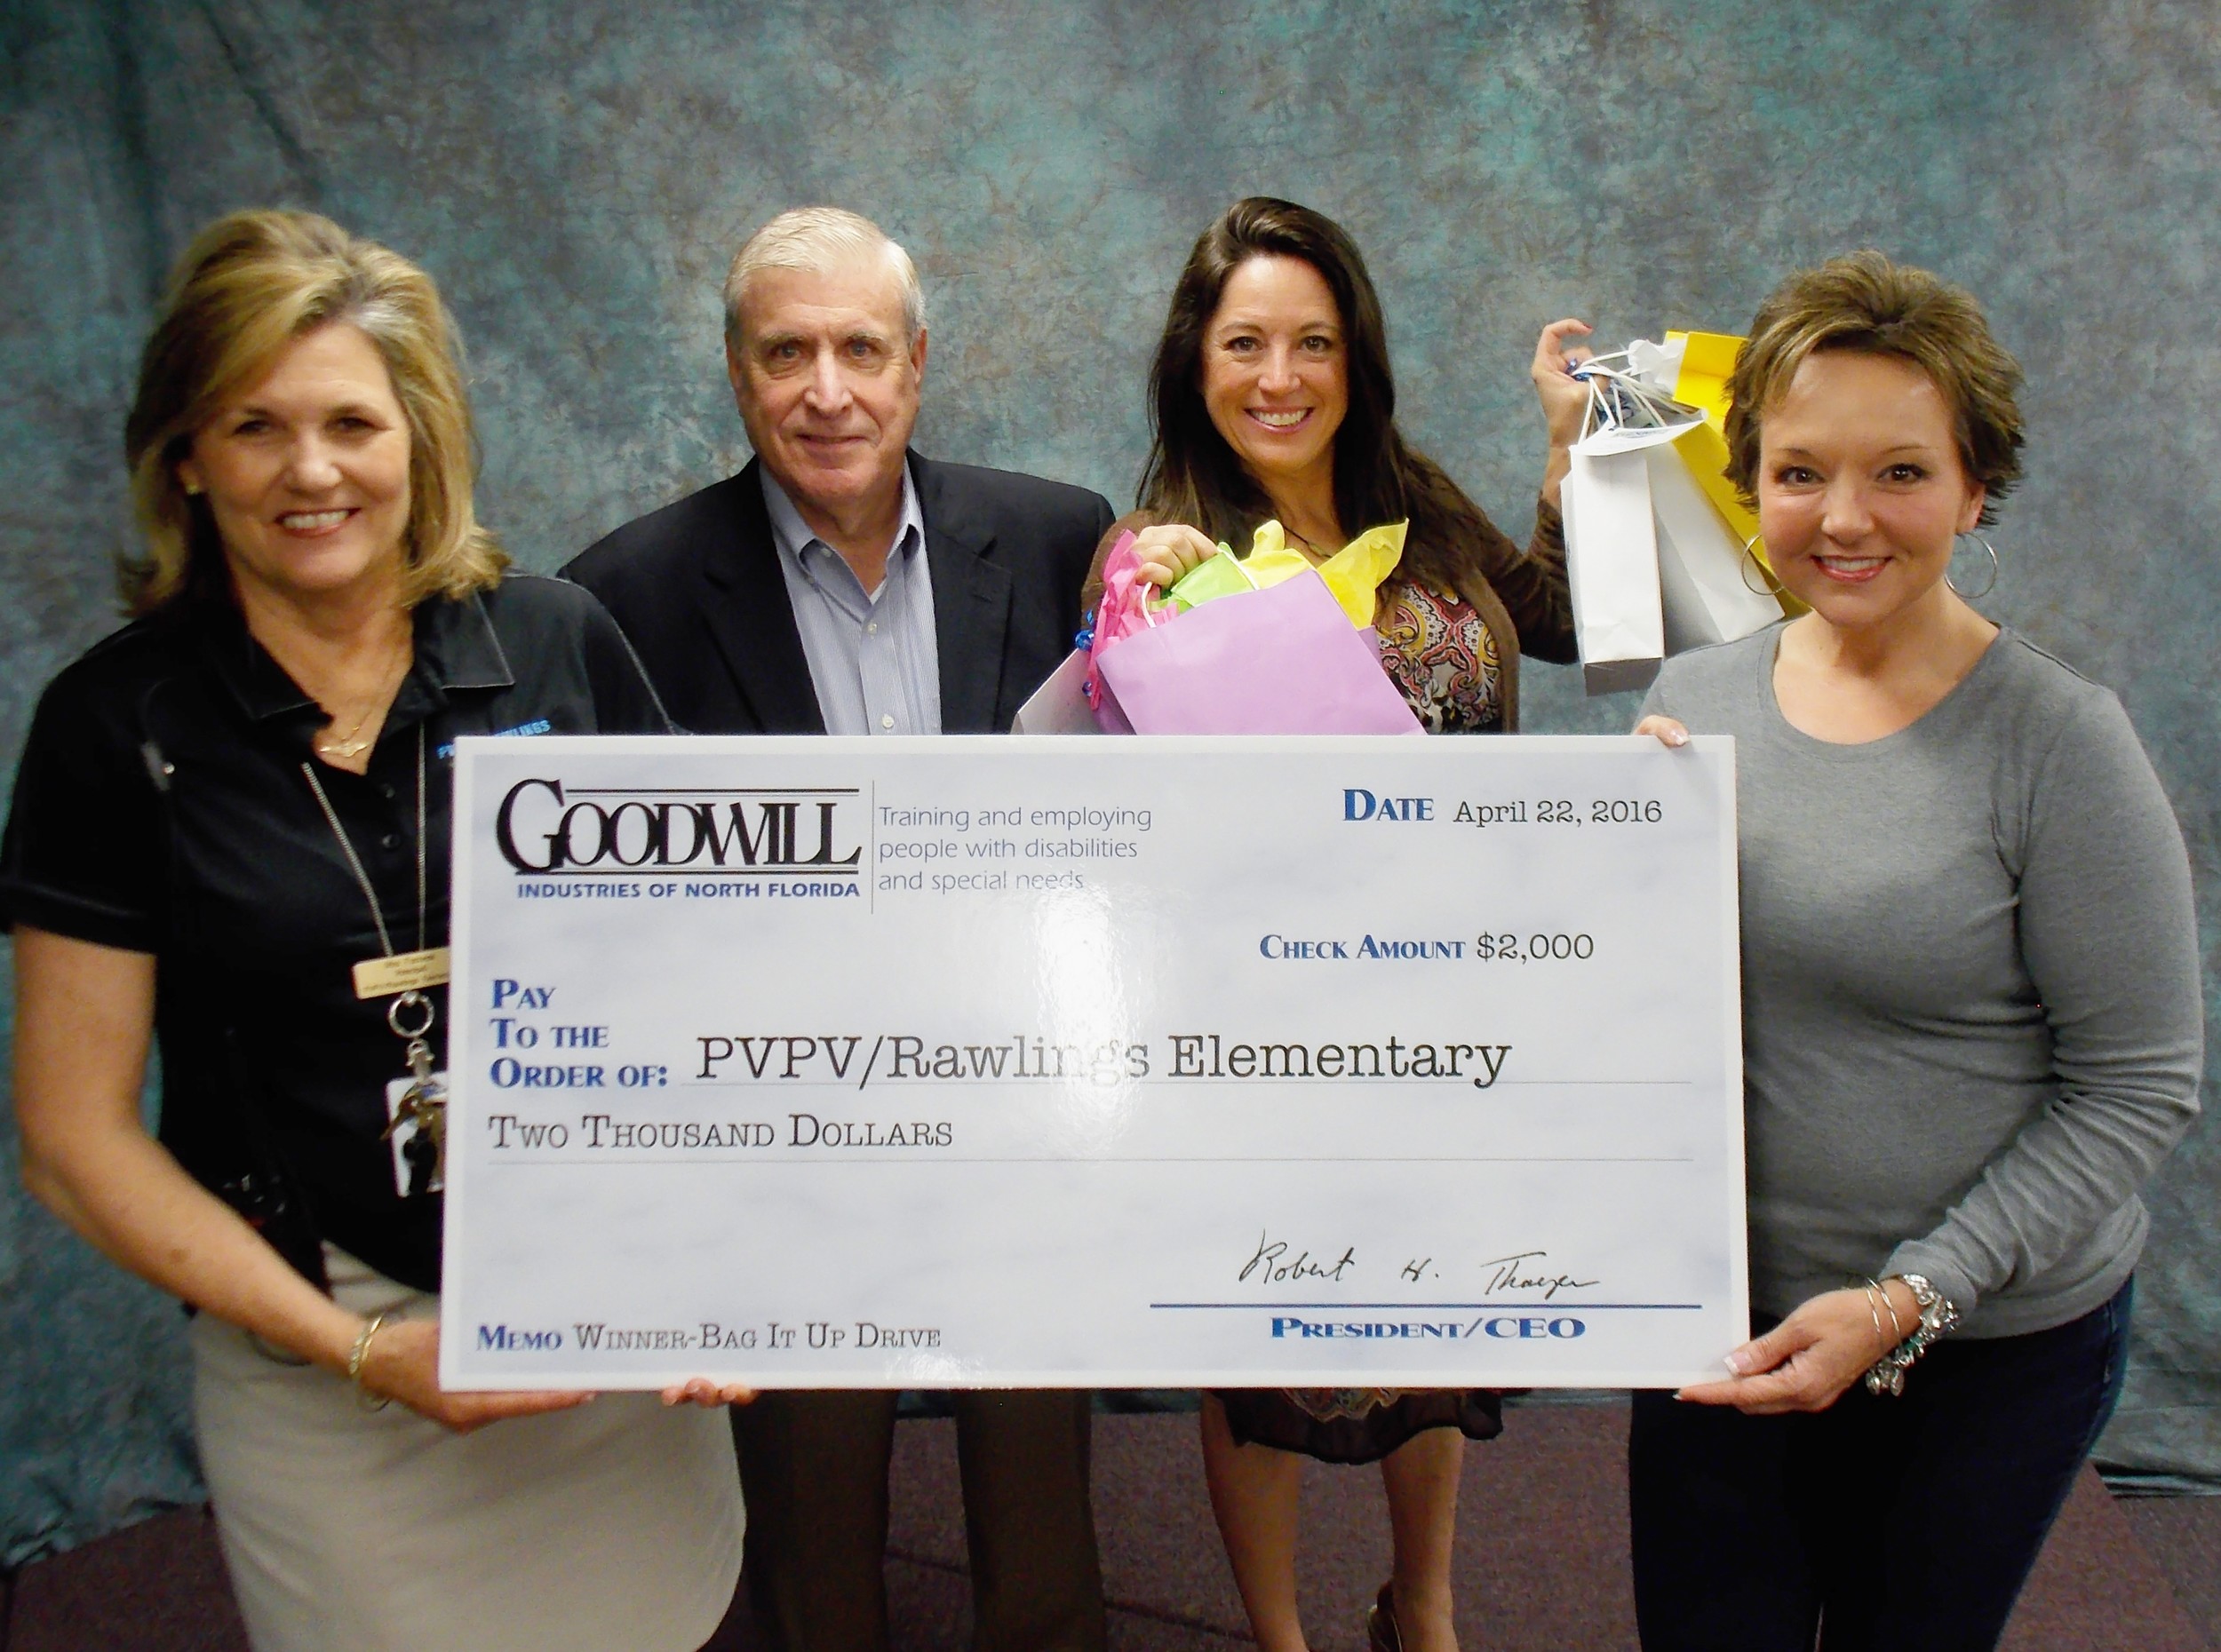 PVPV/Rawlings Principal Kathleen Furness accepts a check for $2,000 from GOODWILL Industries of North Florida CEO Bob Thayer in recognition of the school’s successful “Bag it Up Drive.” From left: Furness, Thayer, GOODWILL Vice President of Marketing Tracy Collins and teacher Dawn Radford